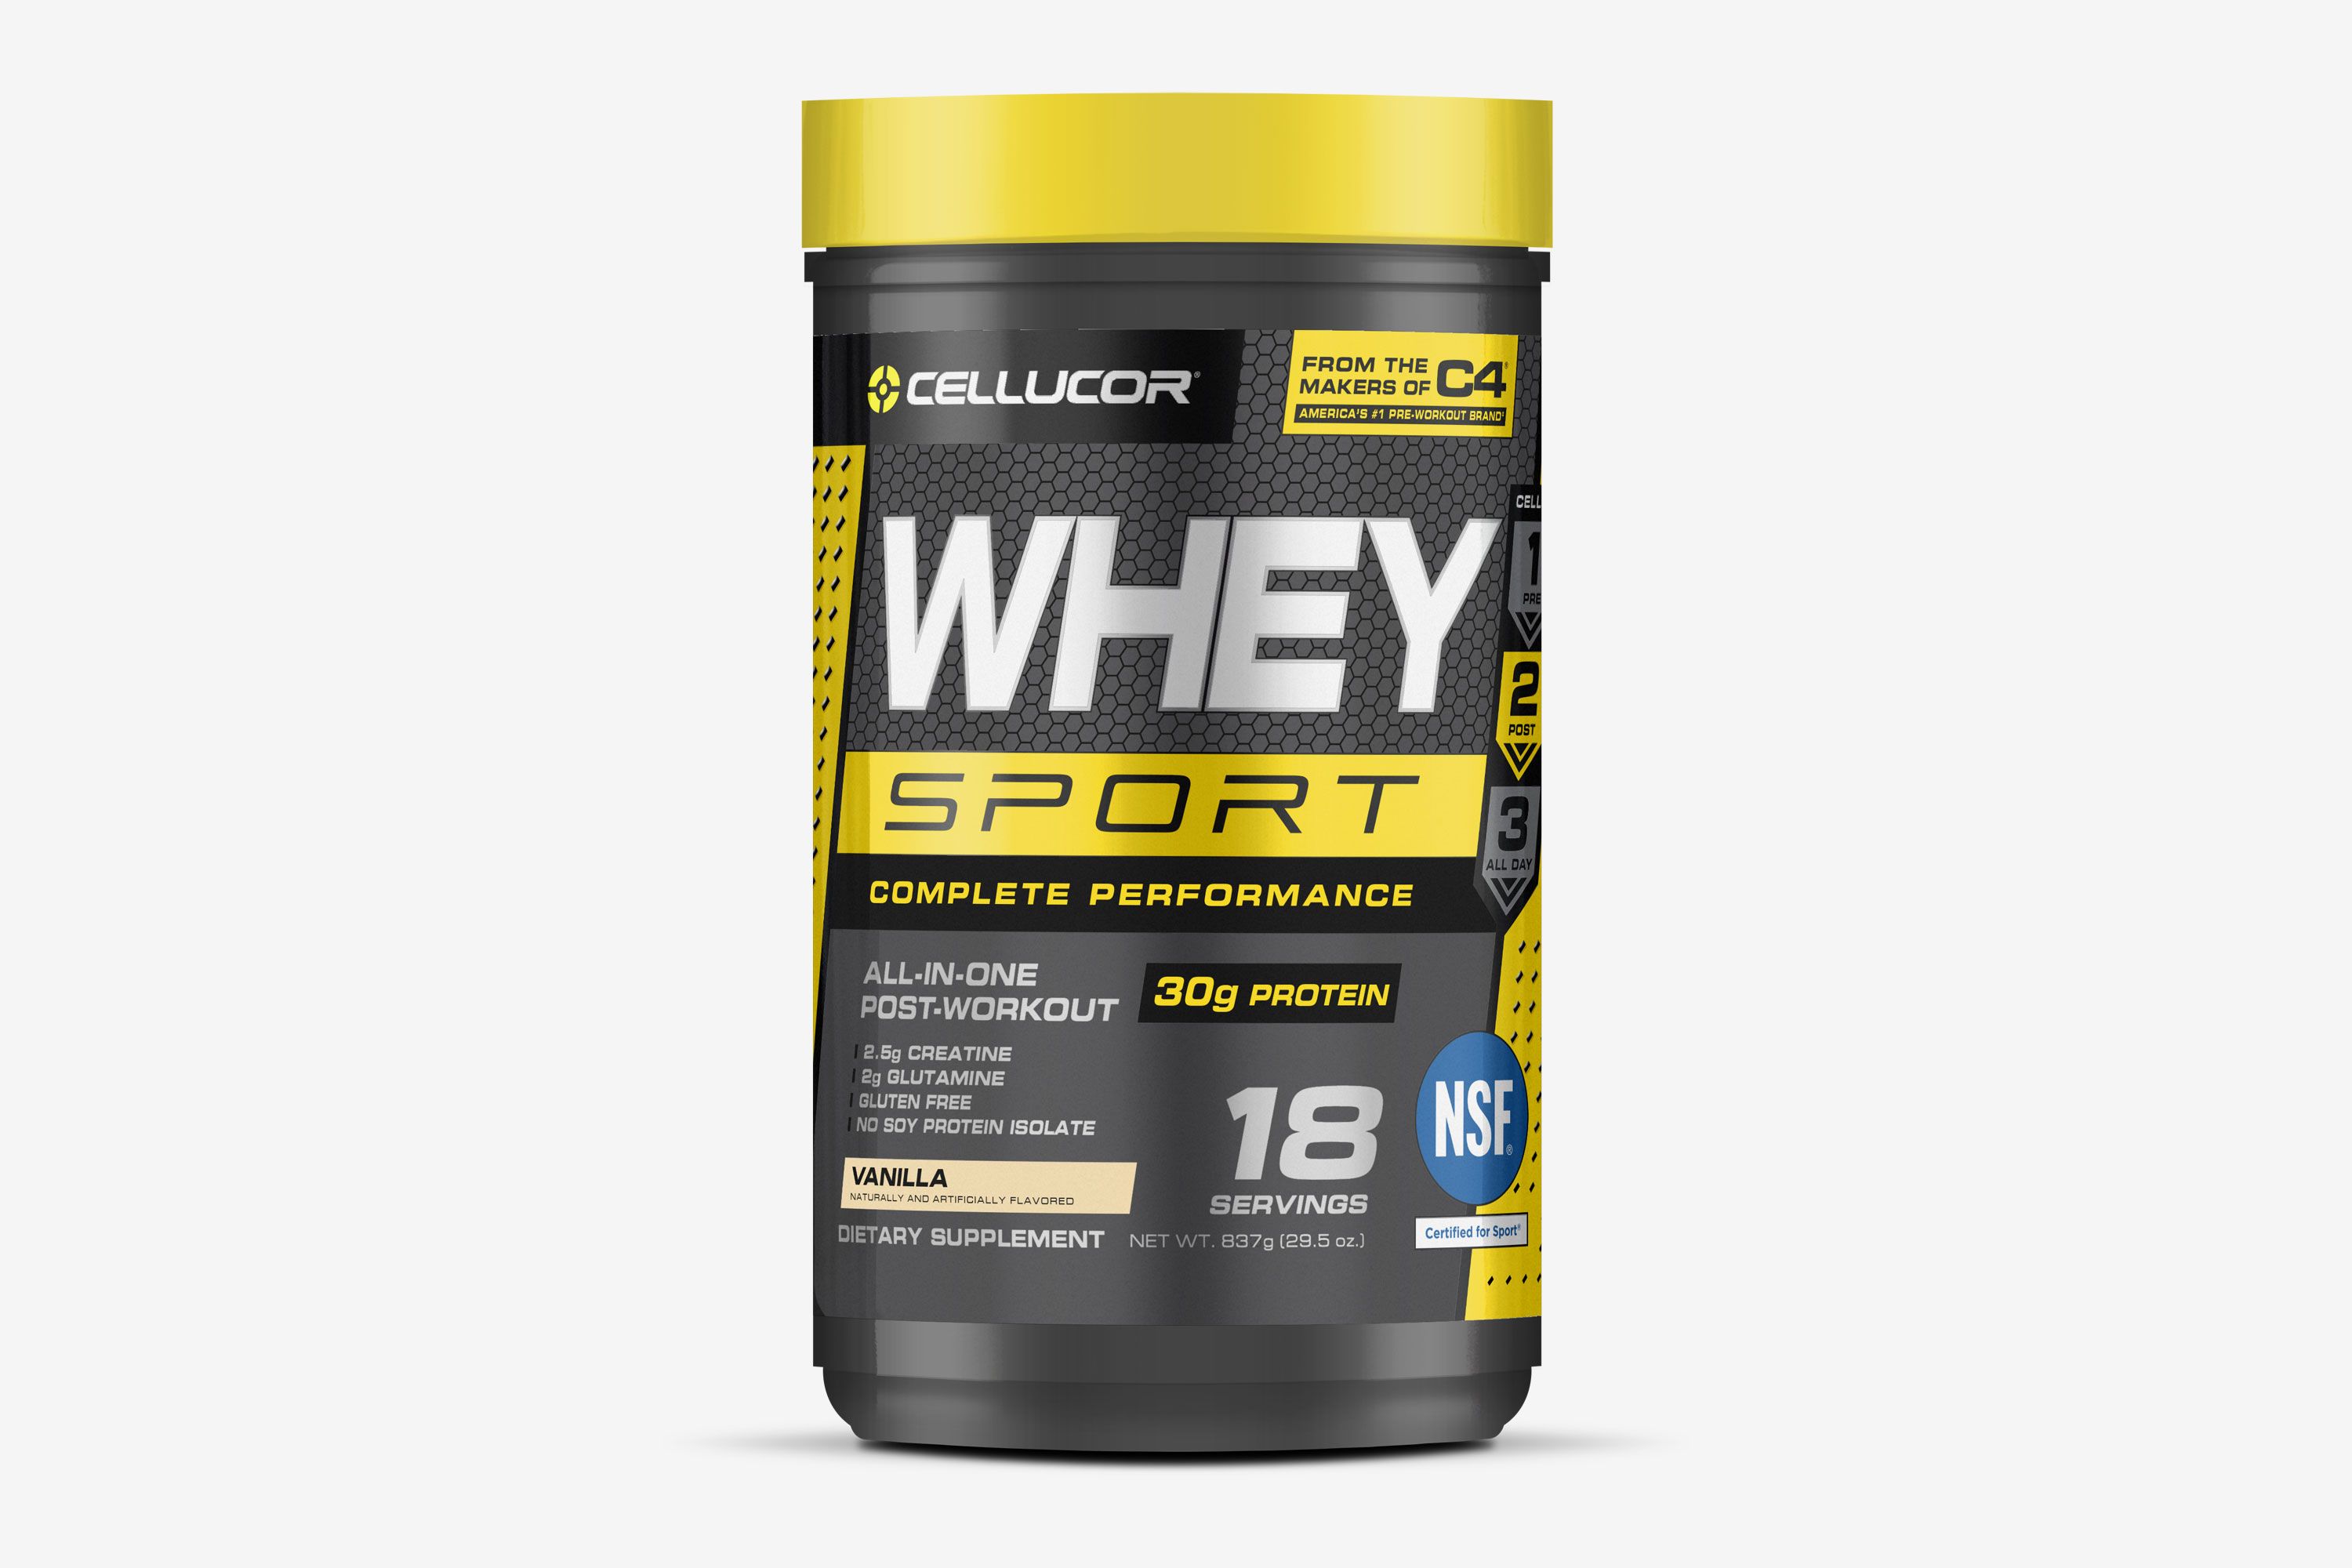 Whey protein powder brands list grouphohpa